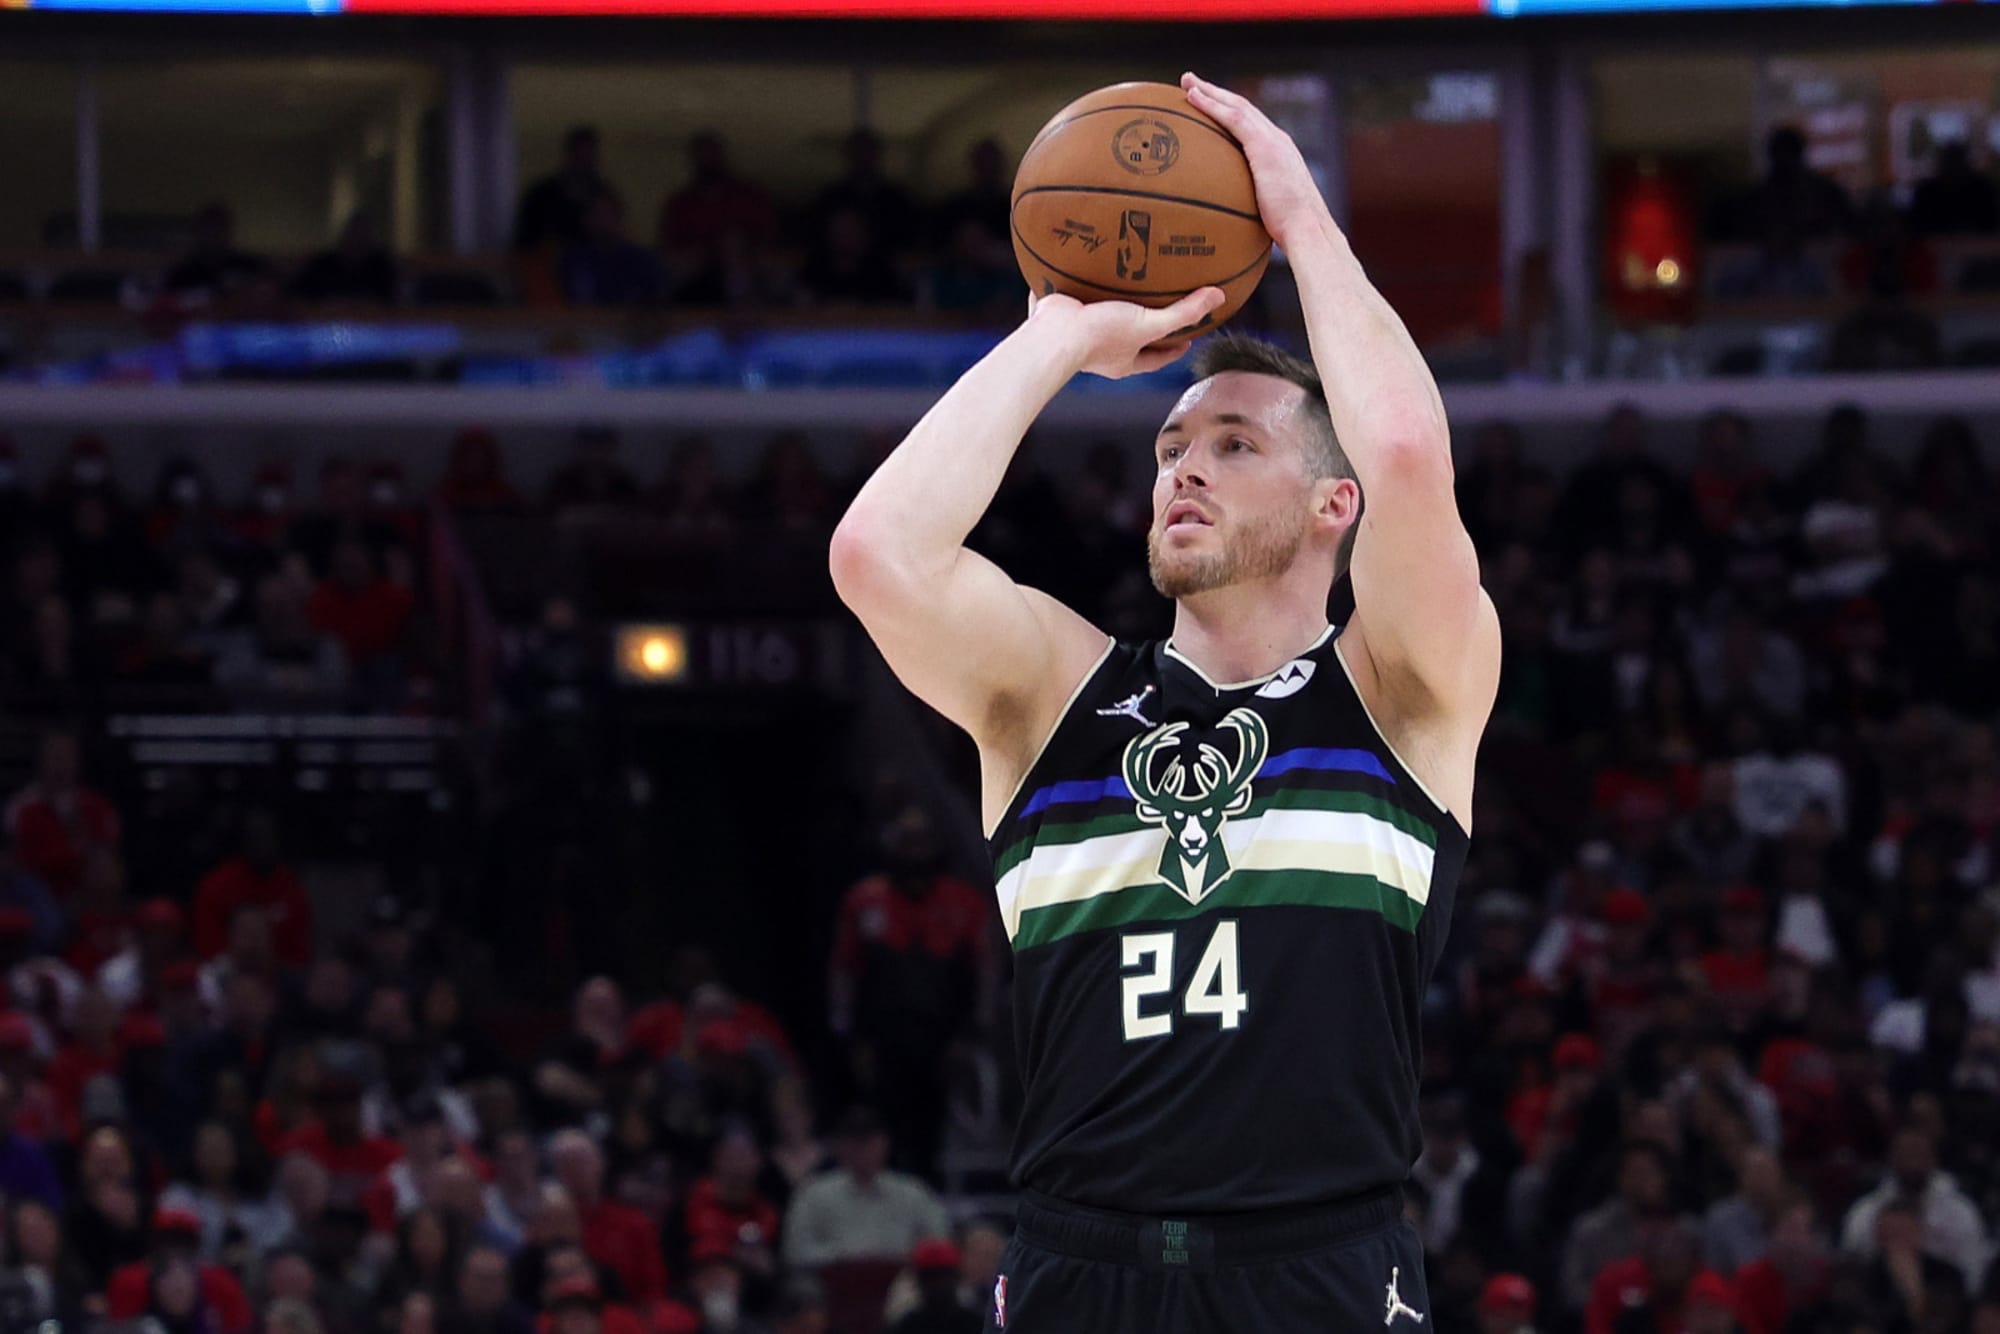 Pat Connaughton has picked up the player option in his contract and will return to the Milwaukee Bucks